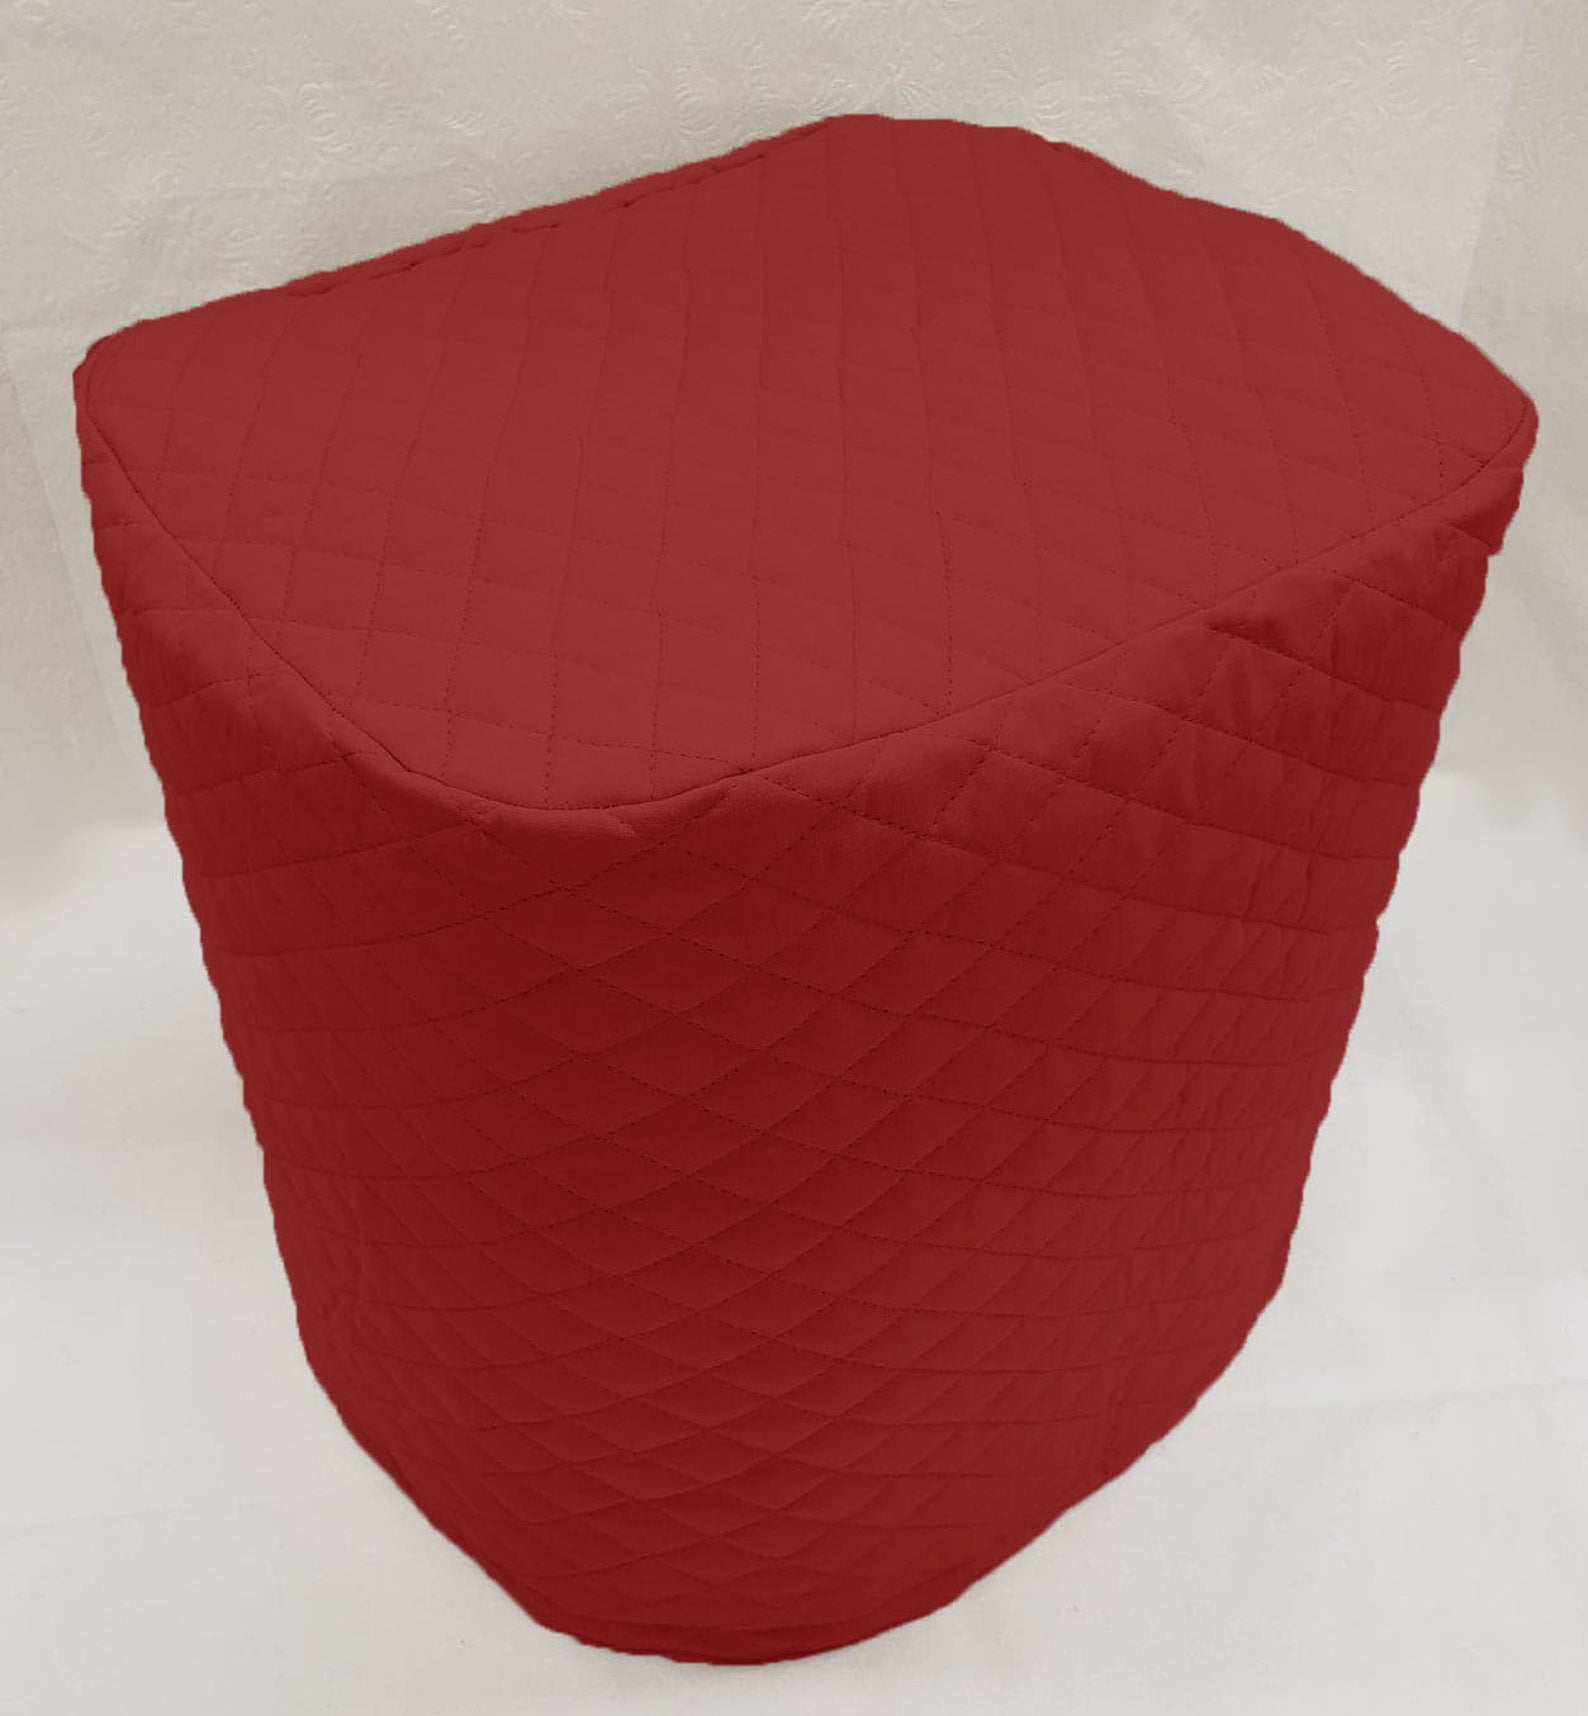 Air Fryer Dust Cover, Air Fryer Cover Cloth Round Rice Cooker